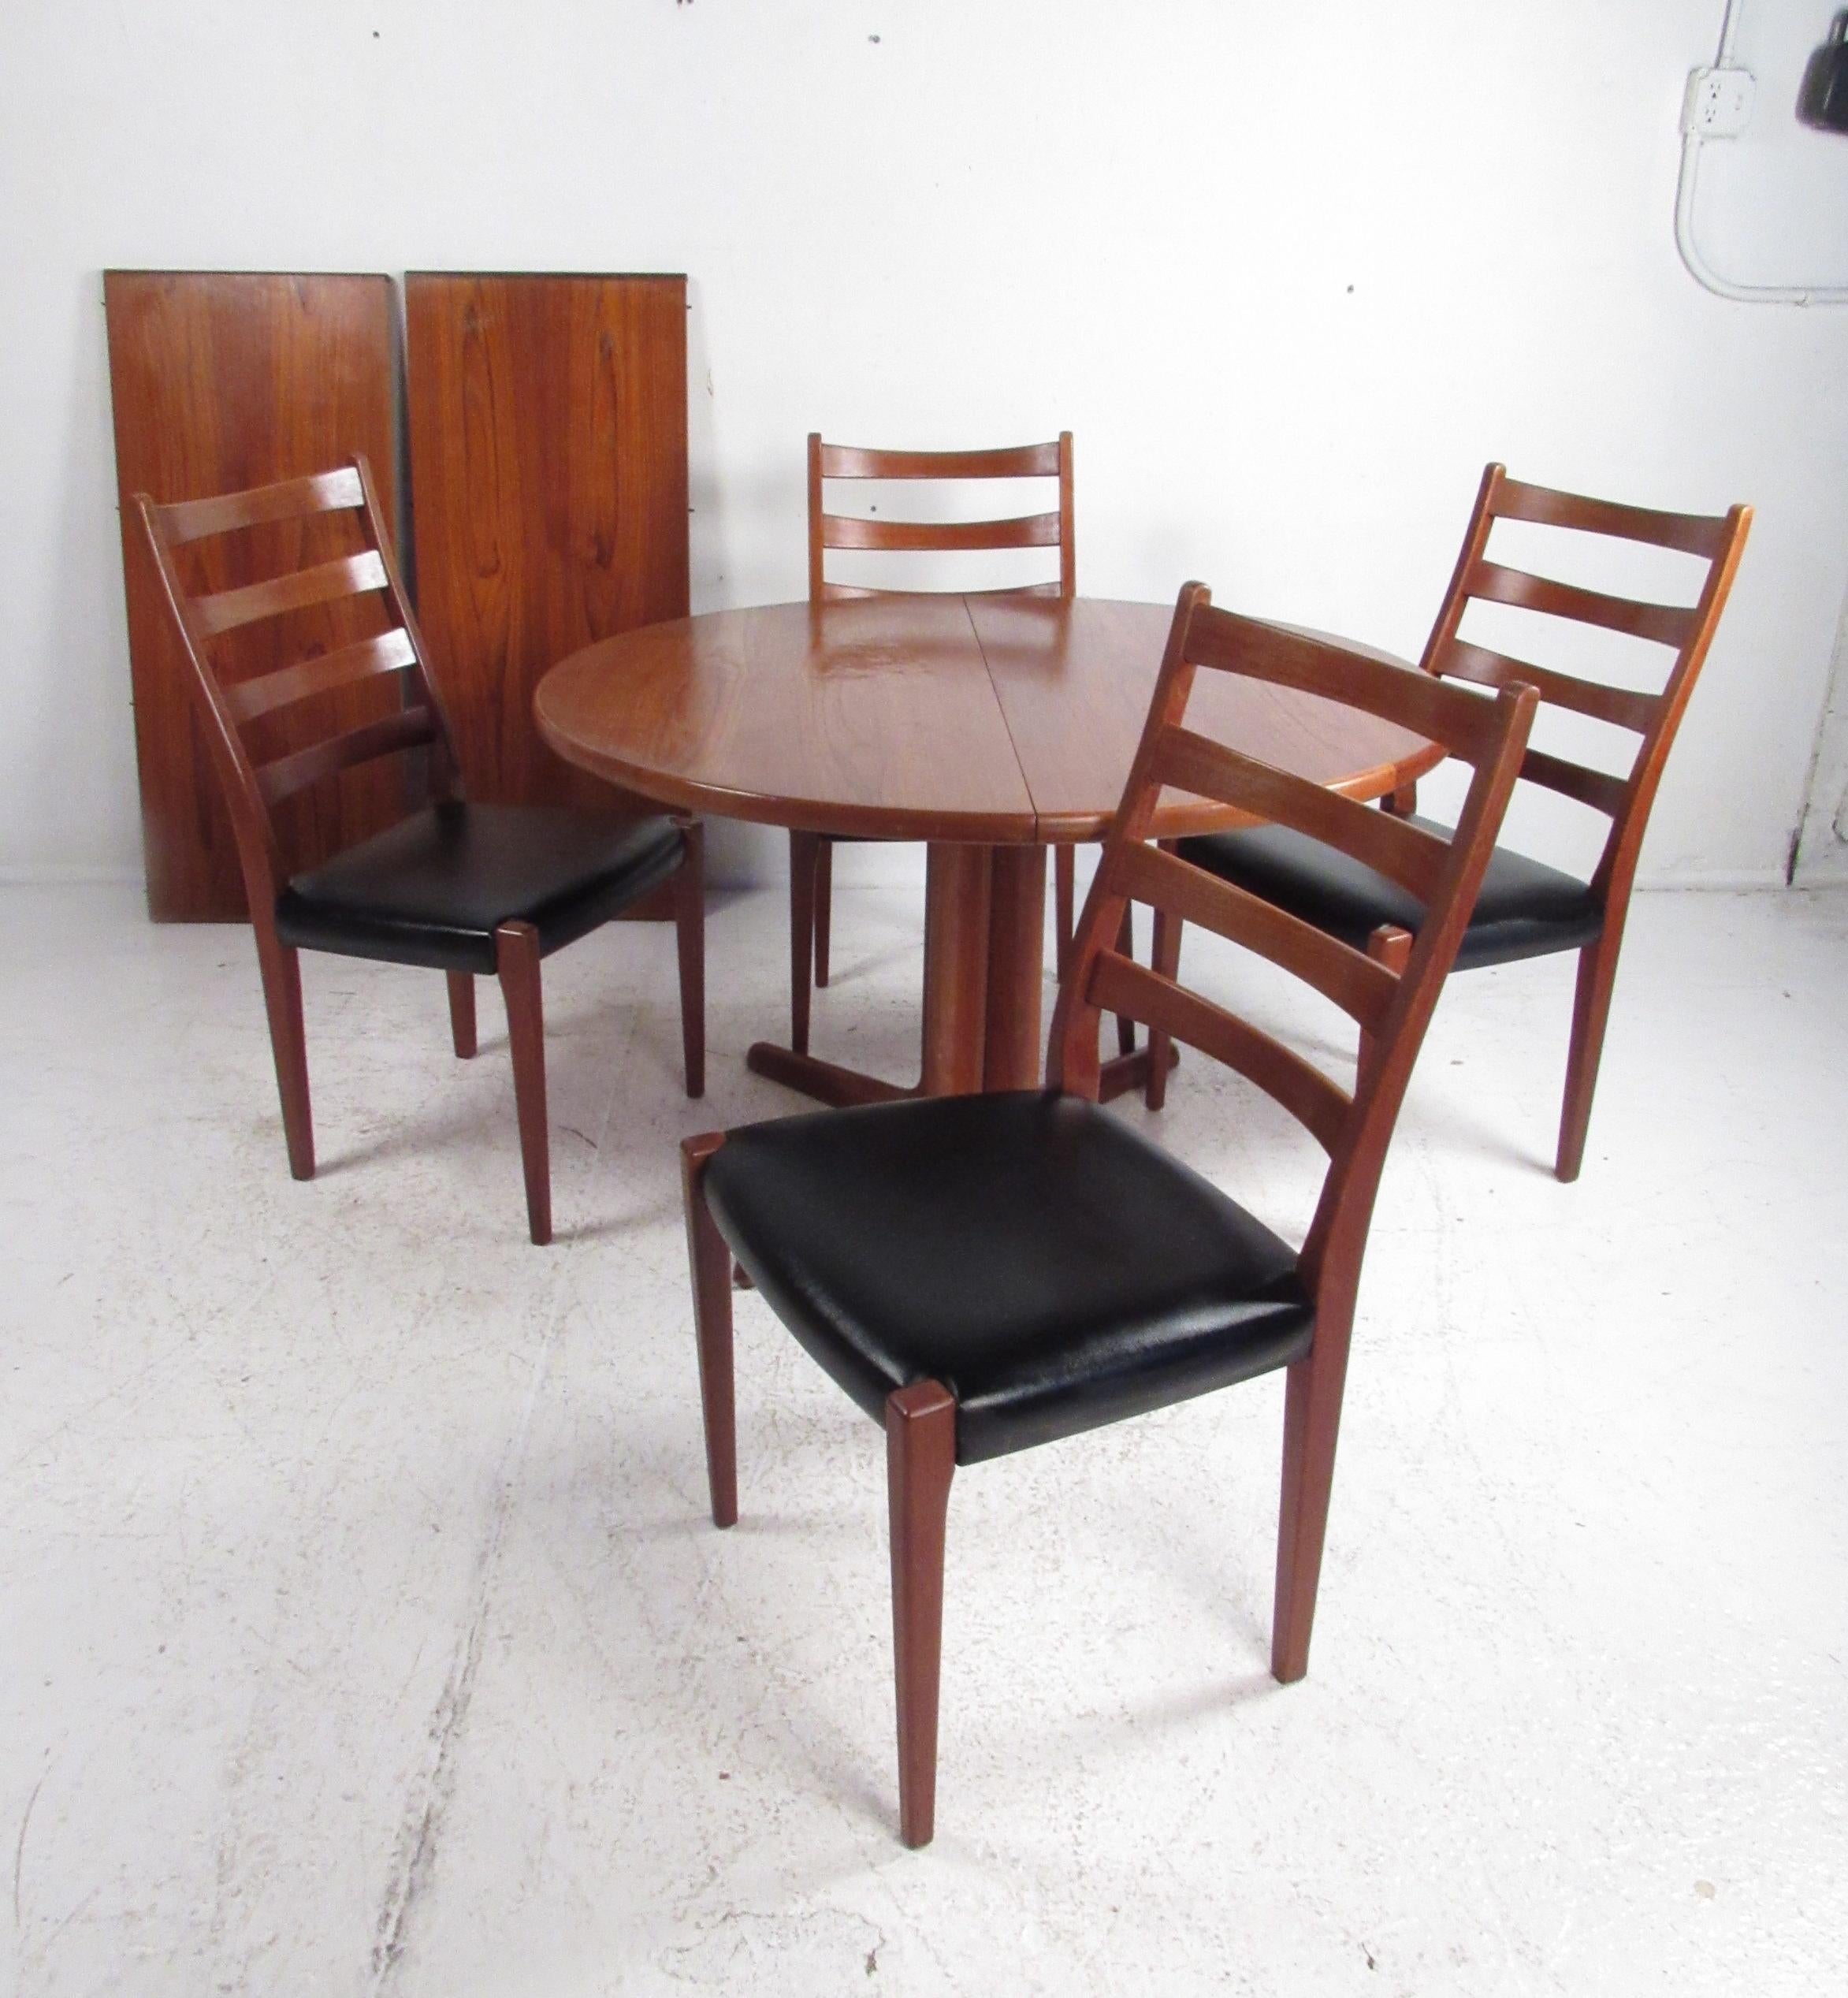 A stunning vintage modern Danish teak pedestal base dining table with two leaves by Skovby Mobelfabrik. This attractive set caters to many with the ability to expand from 46.5 inches to 85 inches wide. The sleek set of four dining chairs boast teak